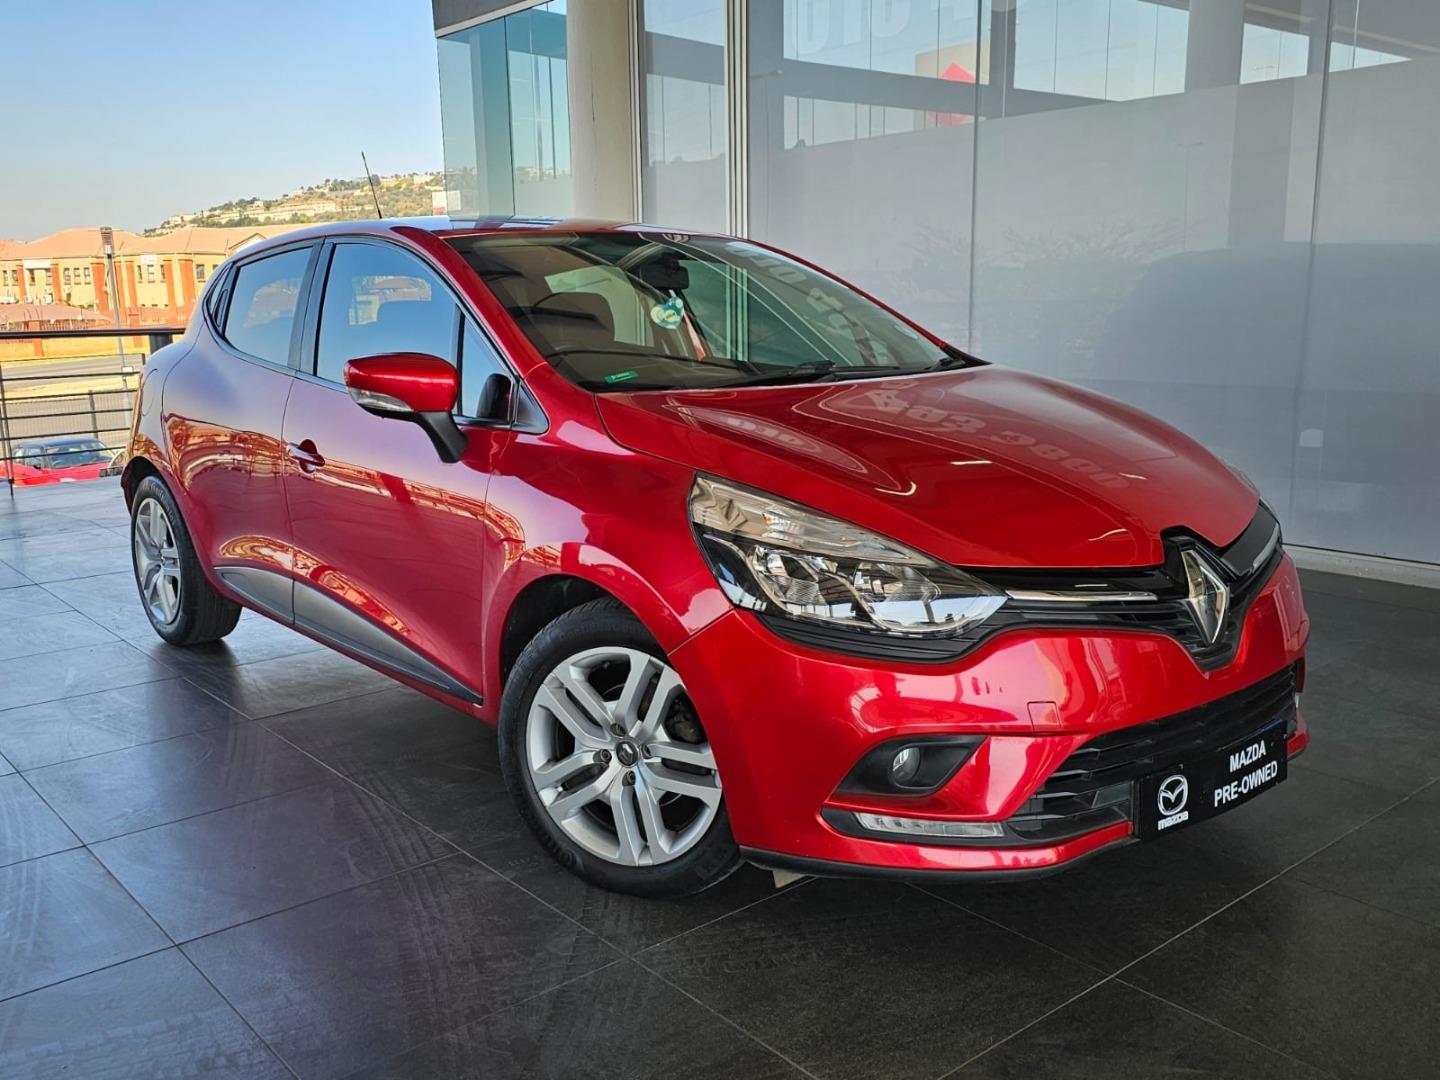 2016 Renault Clio  for sale - UC4458